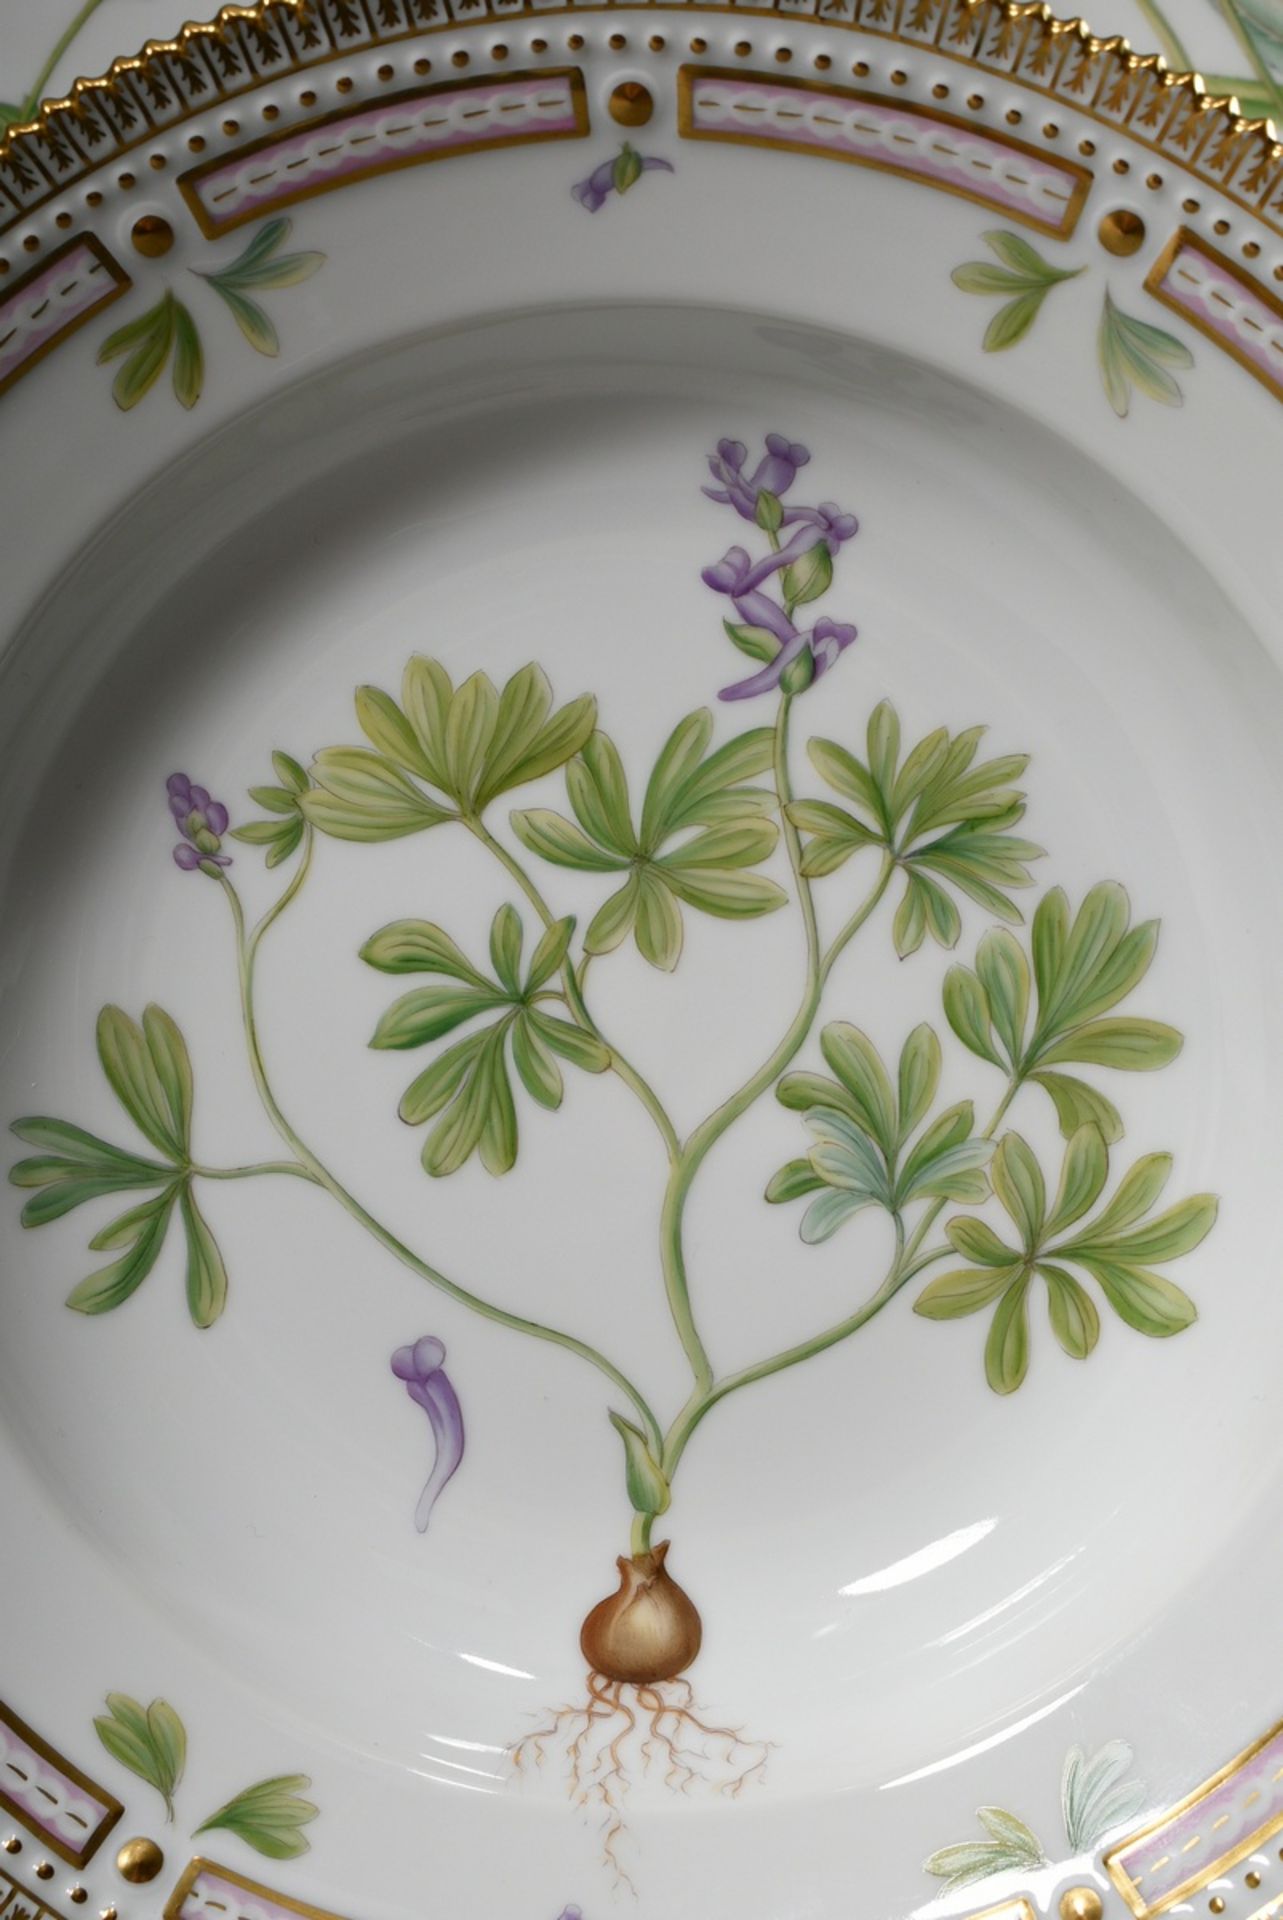 7 Royal Copenhagen "Flora Danica" plate with polychrome painting in the mirror and gold decorated s - Image 4 of 17